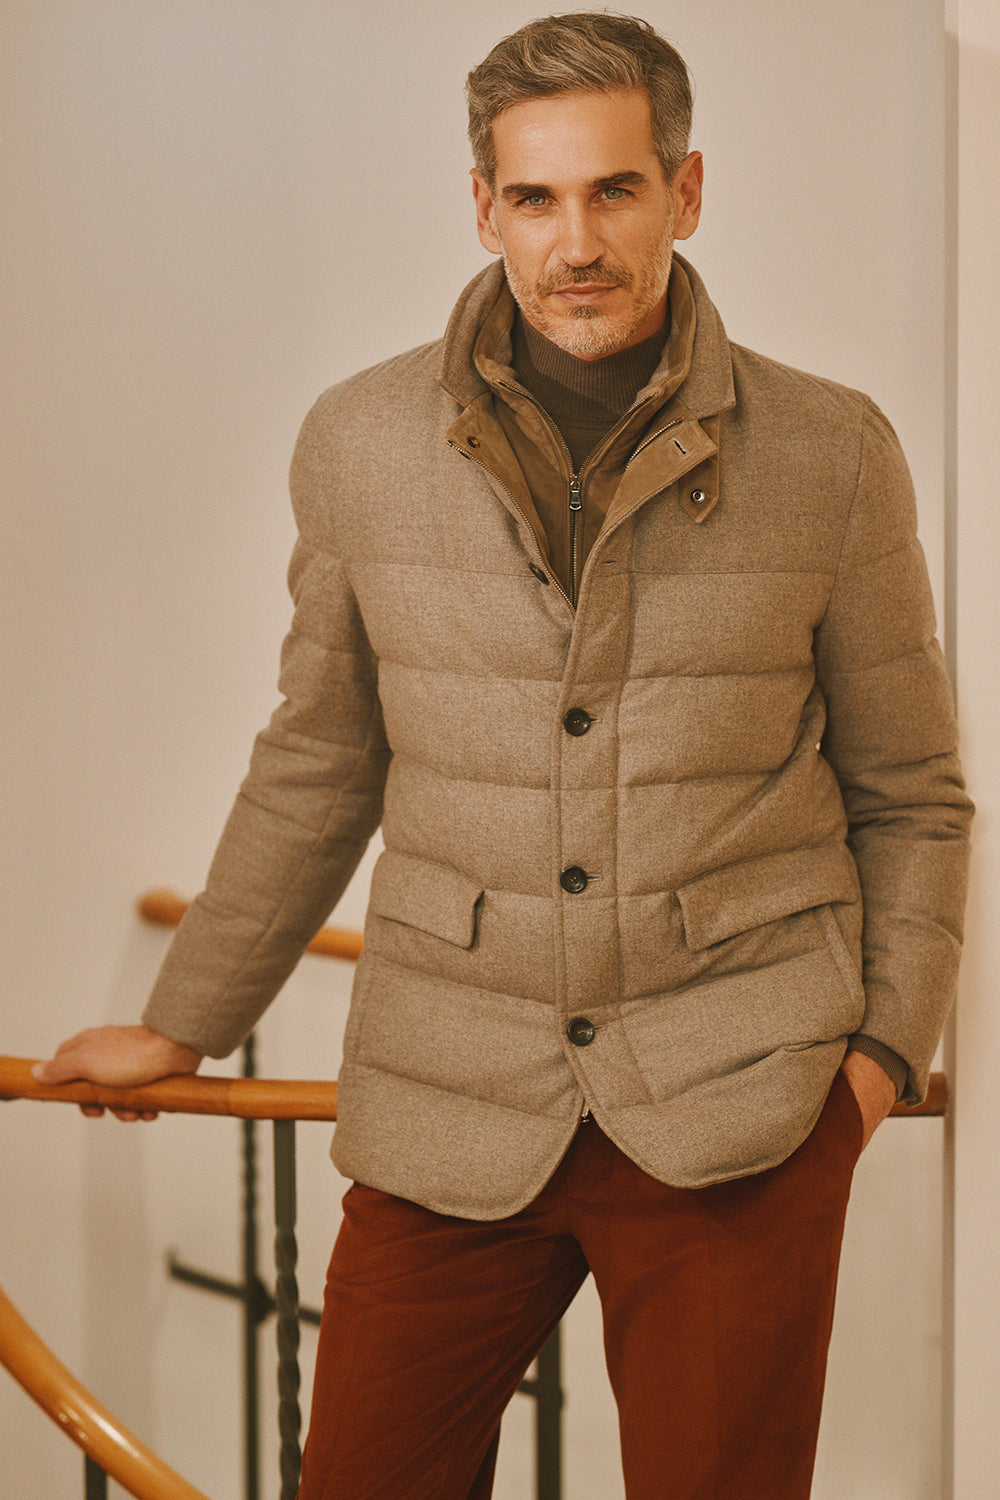 Arric down jacket with leather details